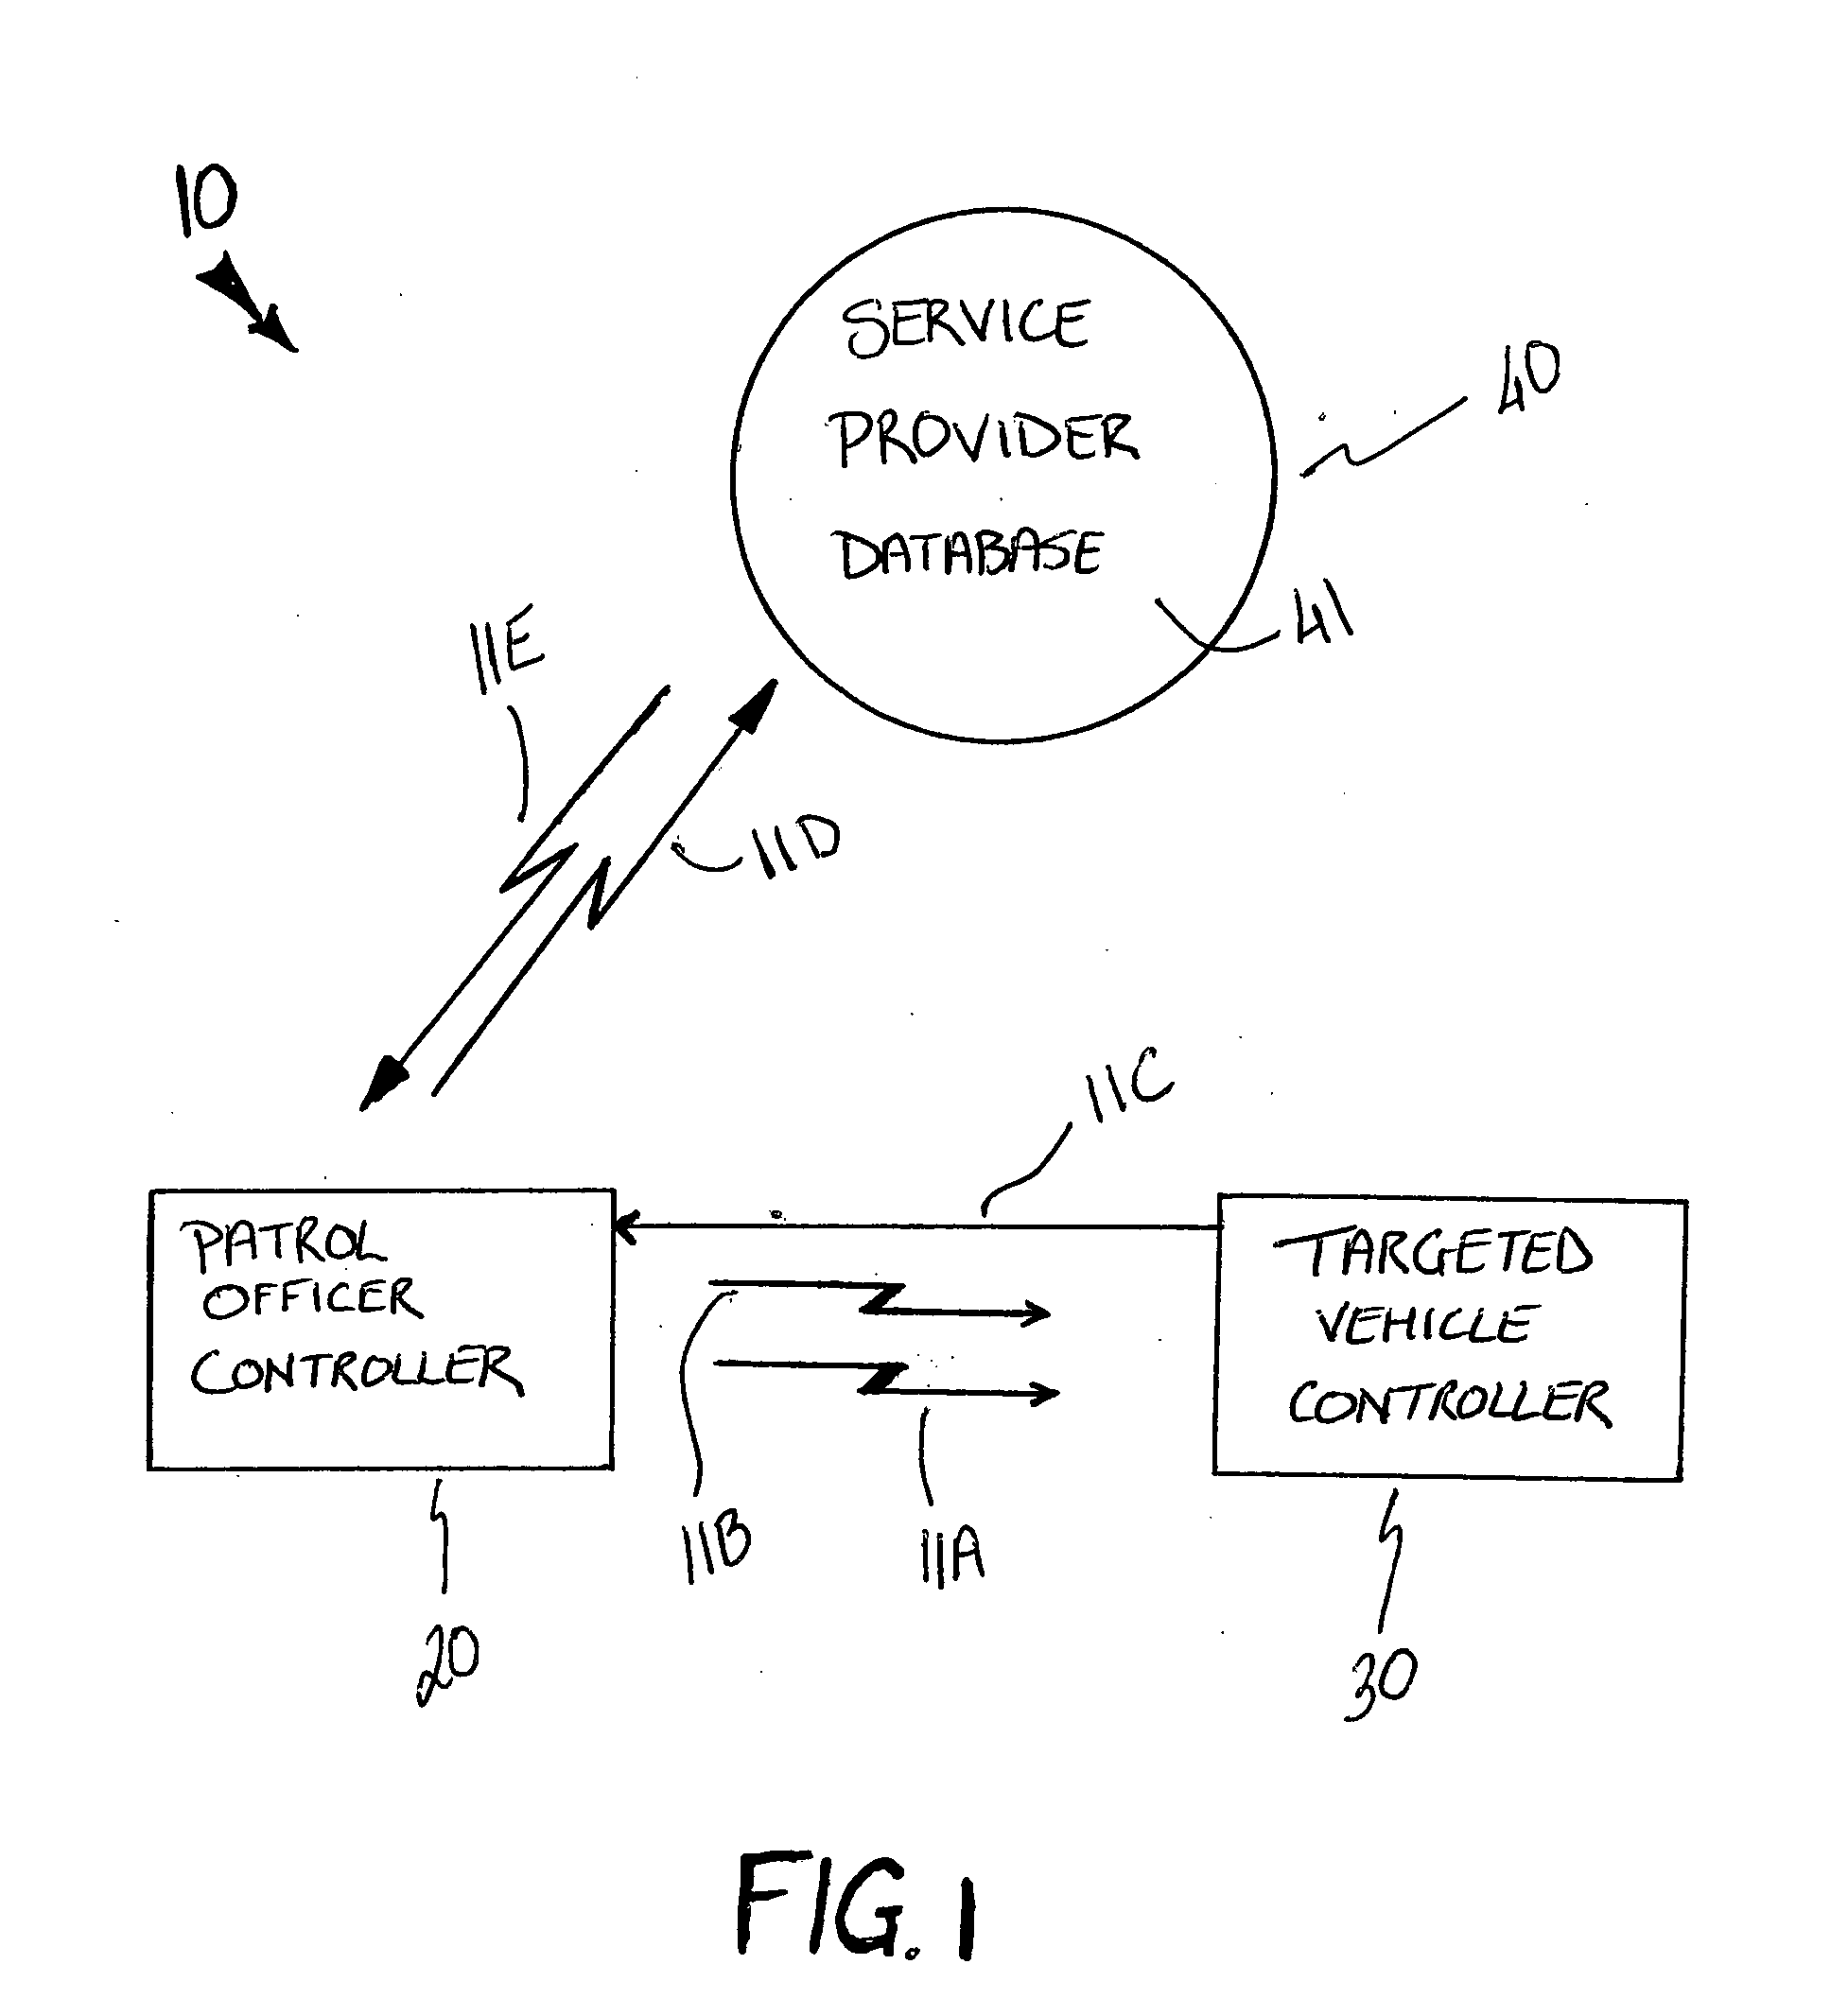 Remotely operable vehicle disabling system